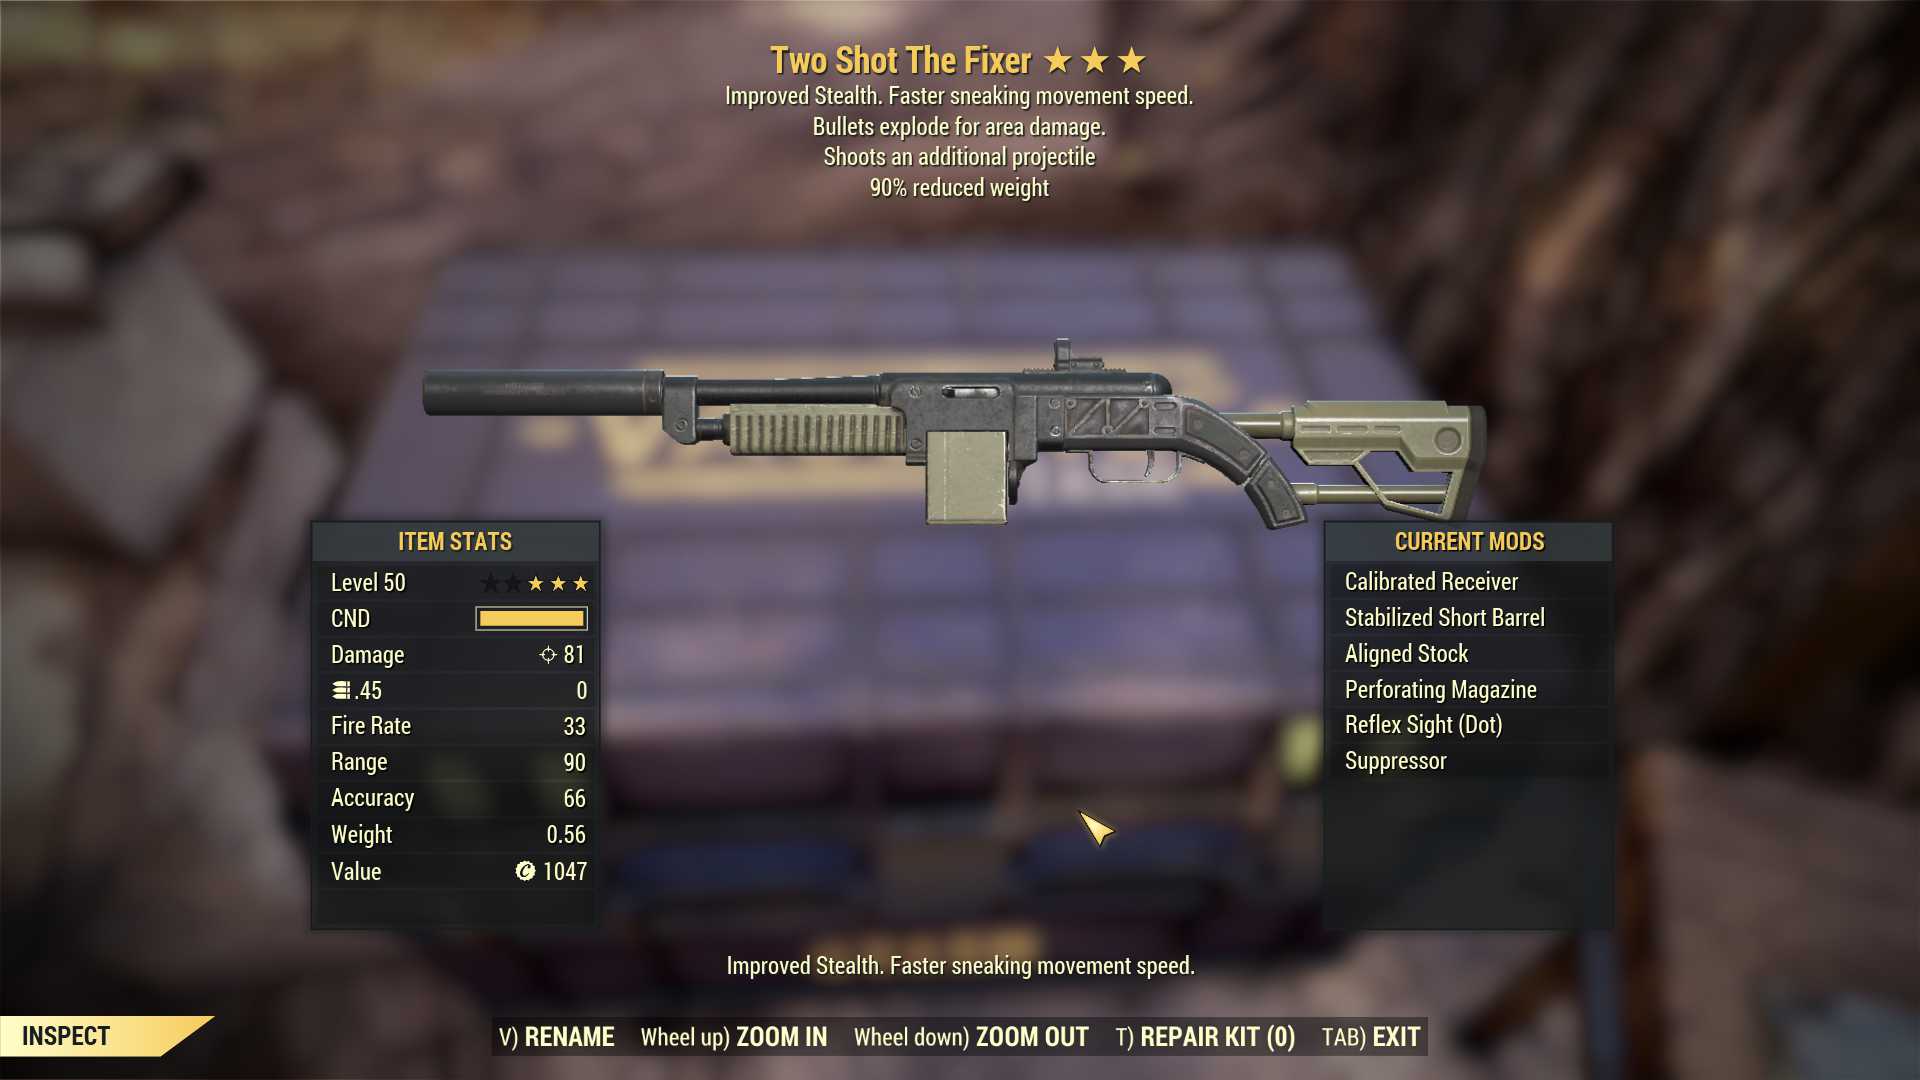 Two Shot Explosive The Fixer (90% reduced weight)